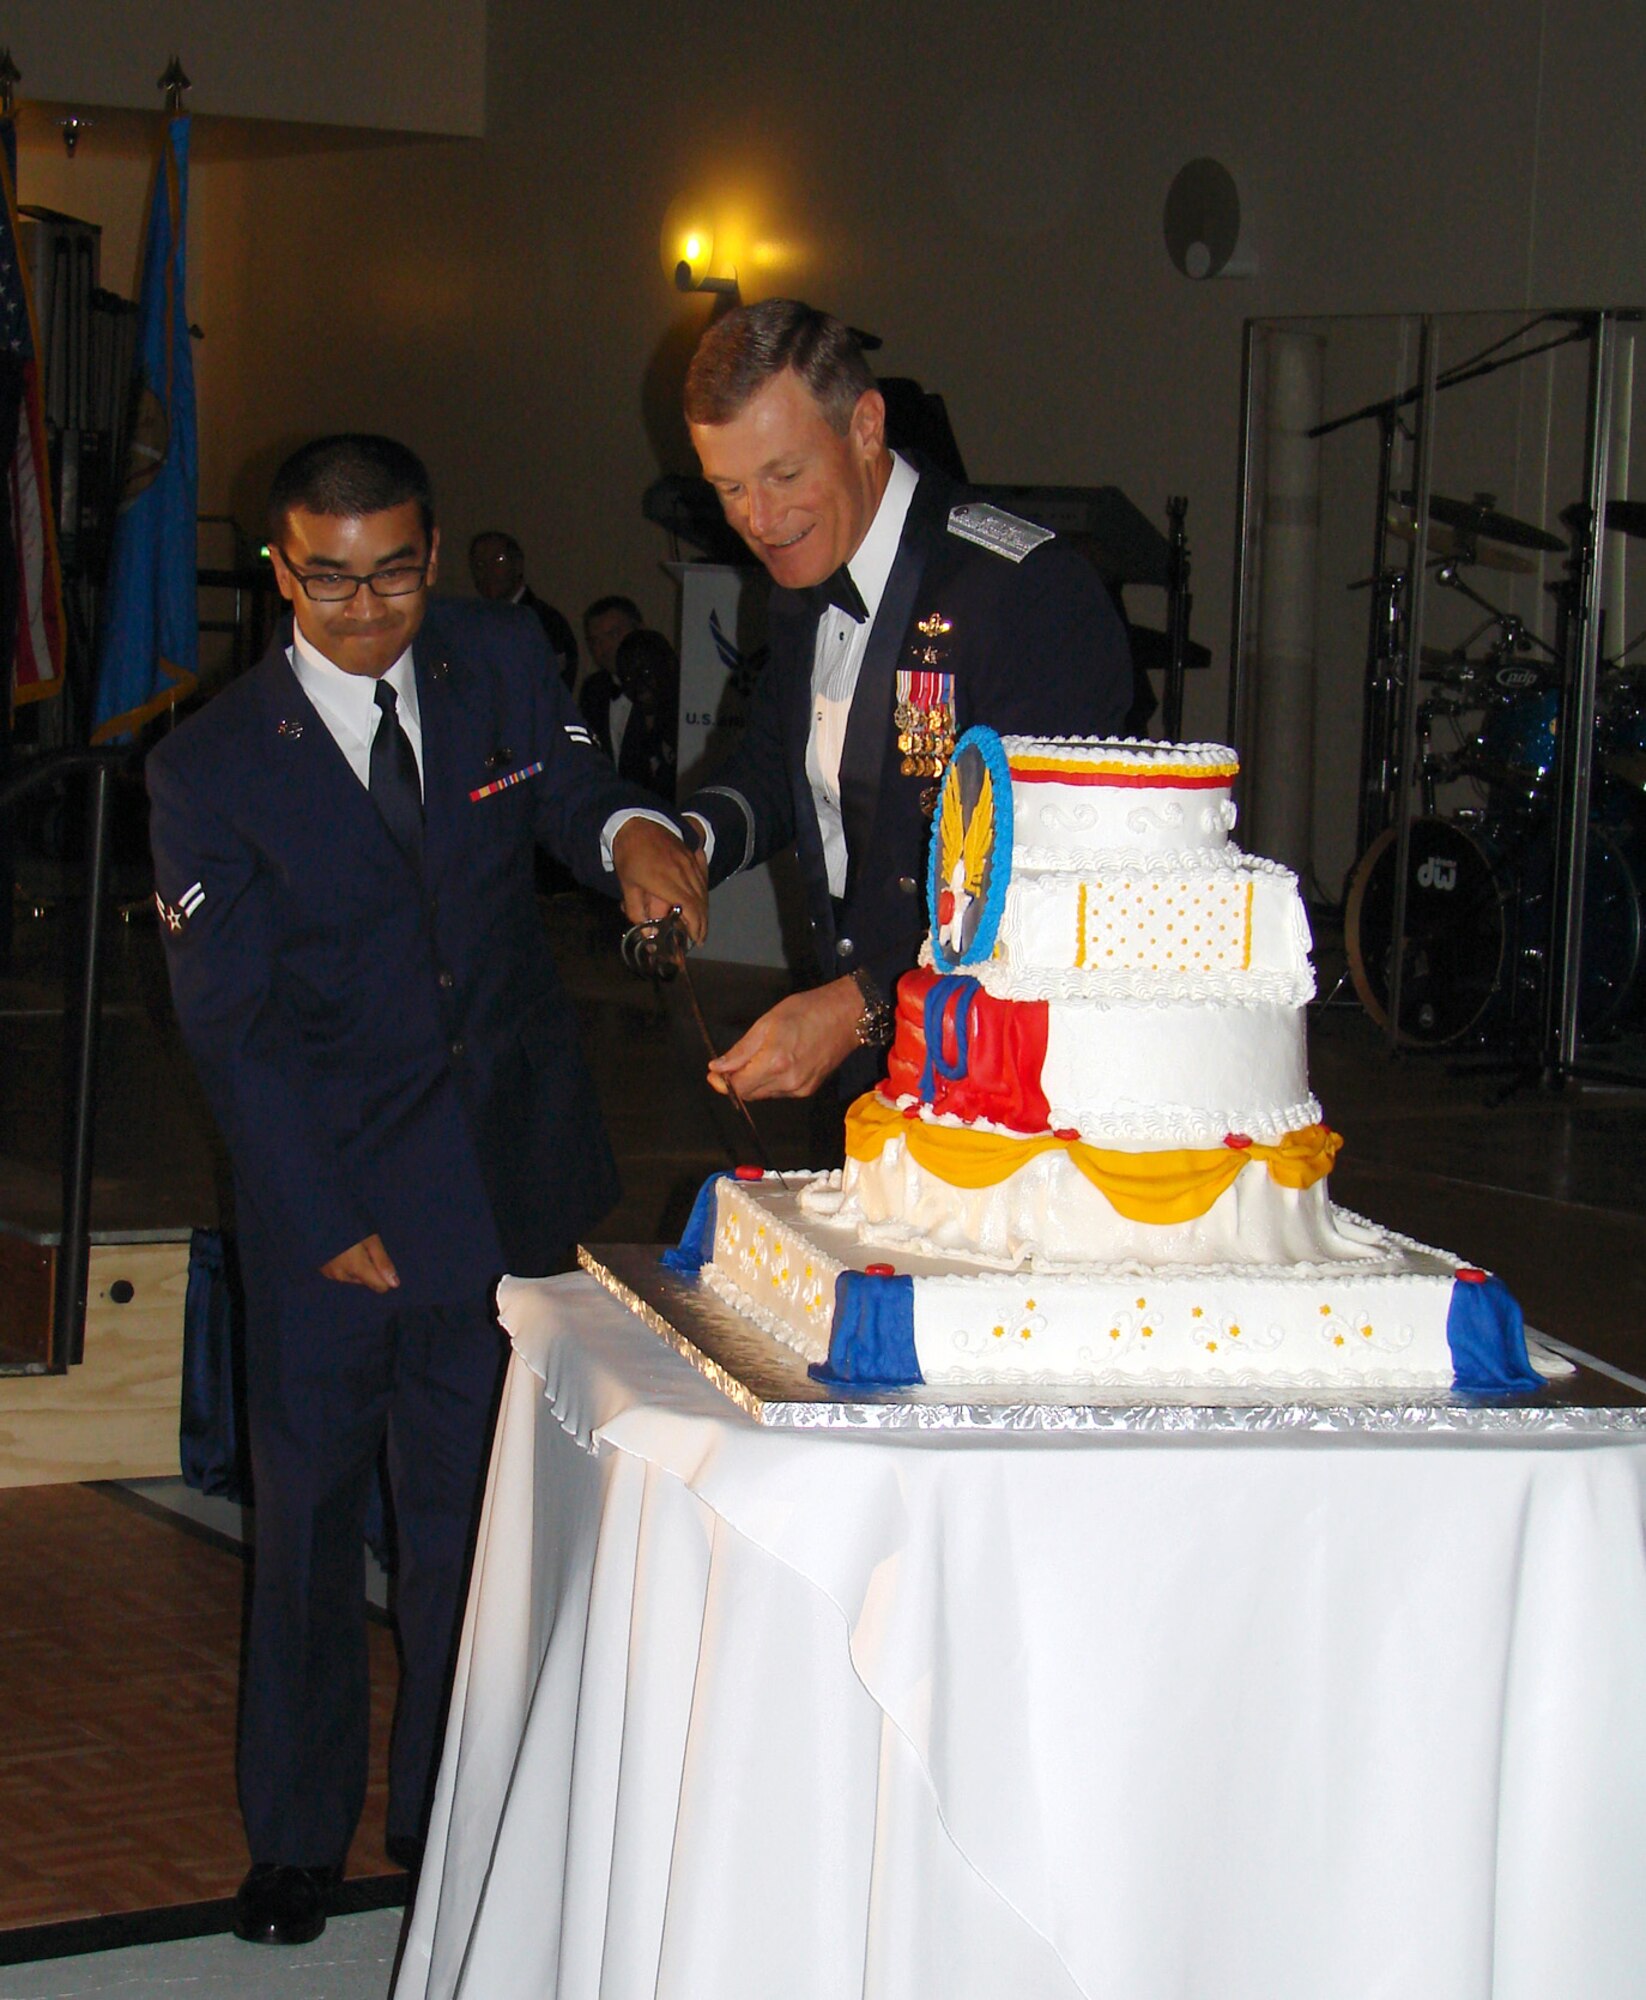 Maj. Gen. Irv Halter, 19th Air Force commander, and Airman 1st Class Sean Noble, 71st Mission Support Squadron personnelist, use a saber to cut the birthday cake at the Air Force 60th birthday celebration Saturday night at Cherokee Strip Conference Center. More than 390 attendees were treated to rousing tributes to the Air Force and Oklahoma, dining and dancing and a guest speech by Maj. Gen Irv Halter, 19th Air Force commander. Top officials from the base, the State of Oklahoma and the City of Enid attended the gala in downtown Enid to commemorate 60 year of an independent Air Force, 66 years of history at Vance and 100 years of heritage of the State of Oklahoma.  (Air Force photo by Capt. Tony Wickman)